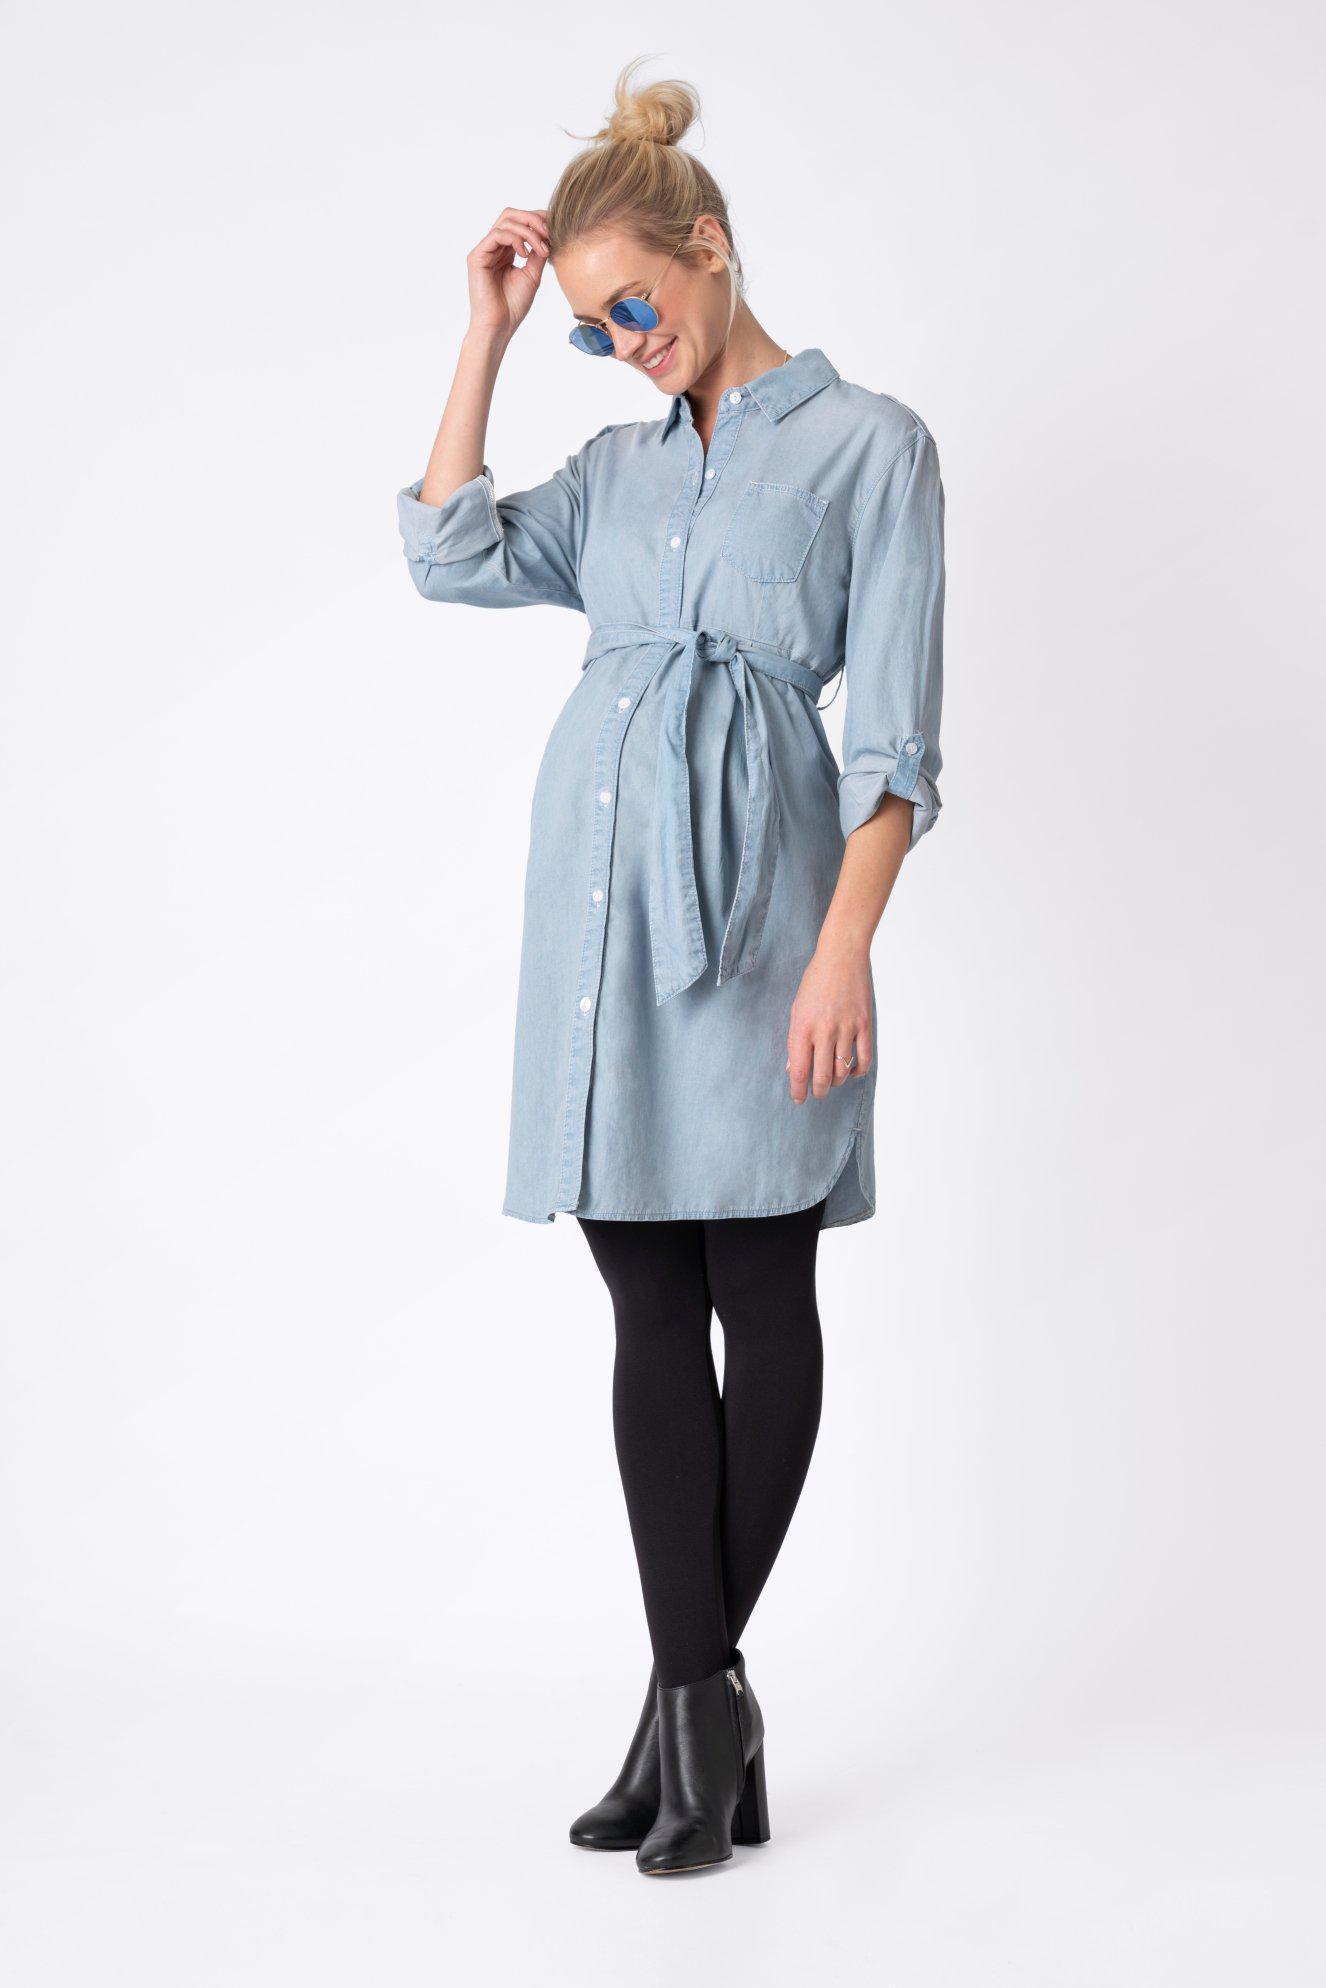 Justine denim dress-Dress-Seraphine-Expectations Copenhagen - pregnant fashion - expecting in style